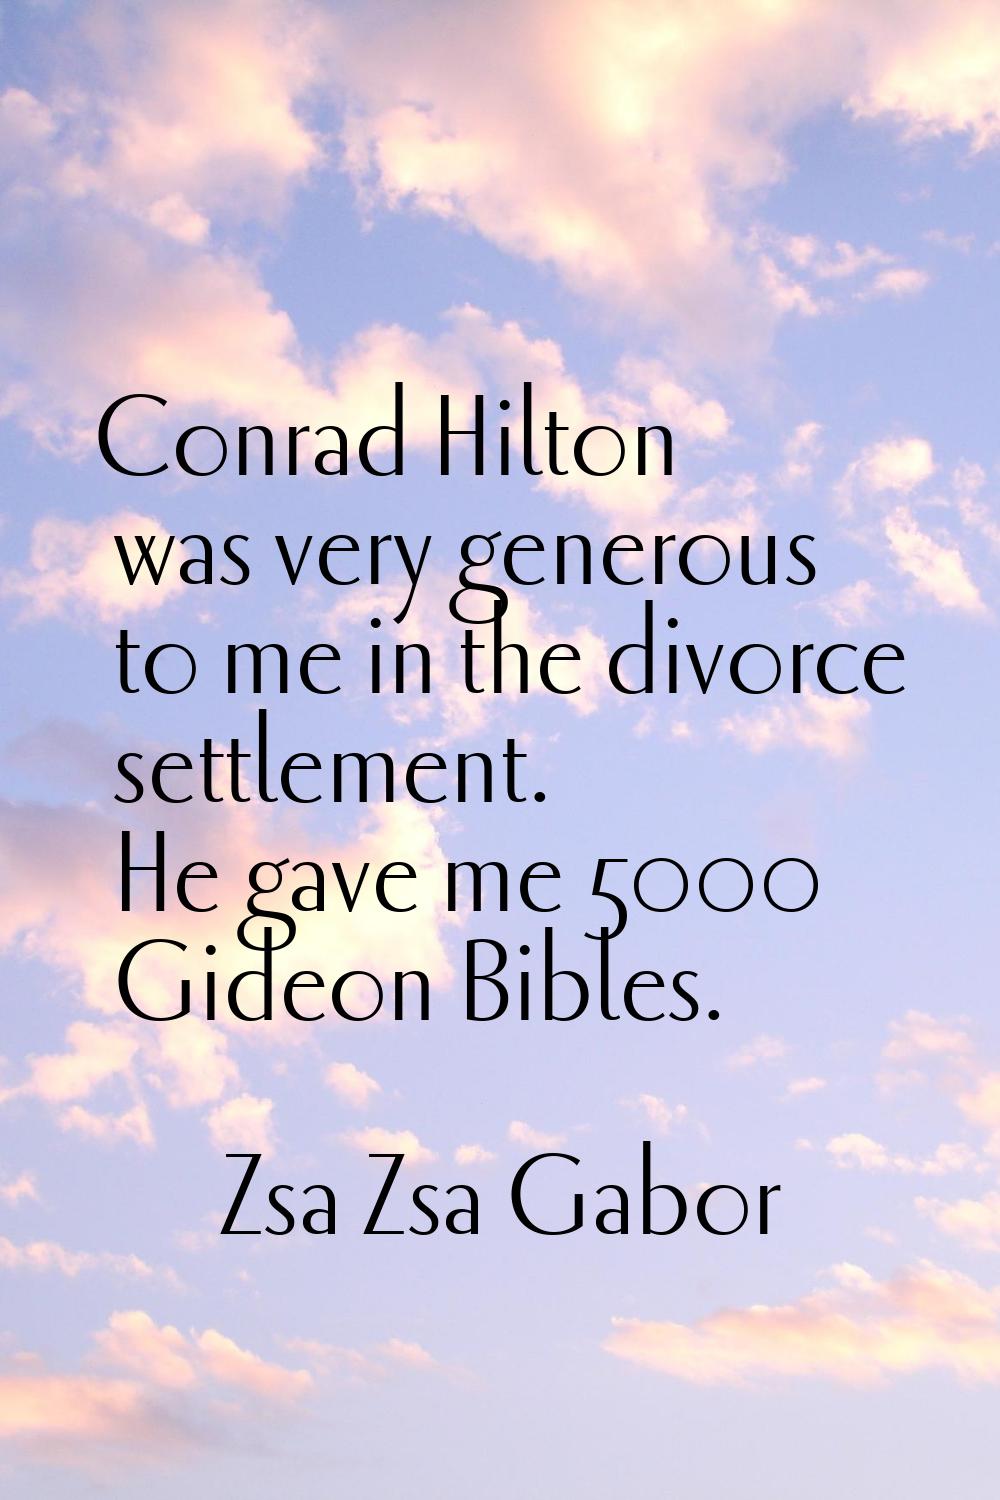 Conrad Hilton was very generous to me in the divorce settlement. He gave me 5000 Gideon Bibles.